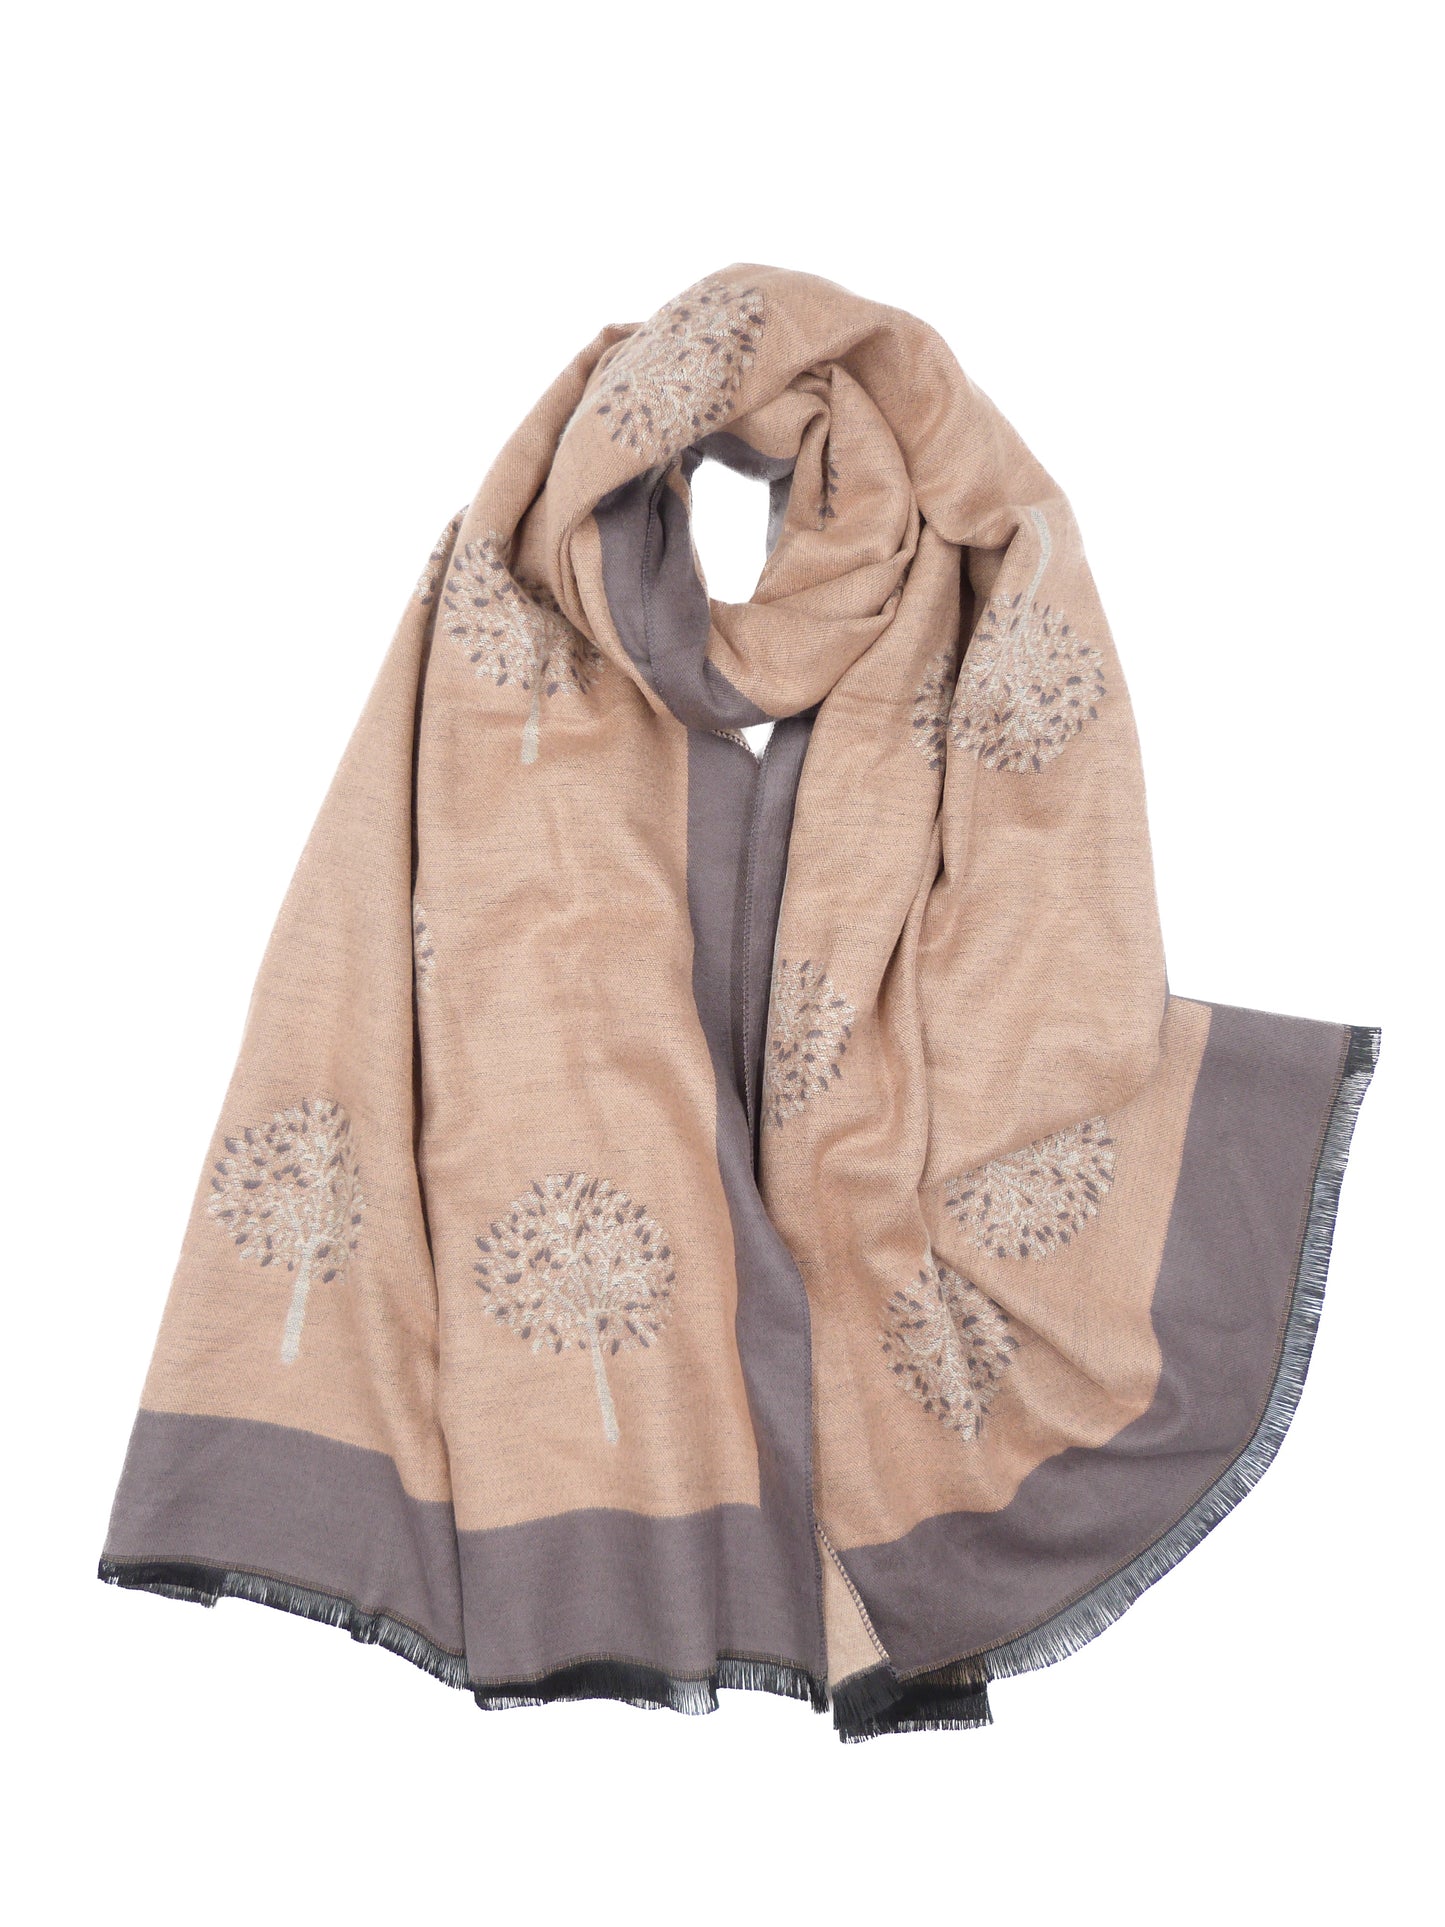 Tree Of Life Reversible Printed Winter Scarf Cashmere Feel